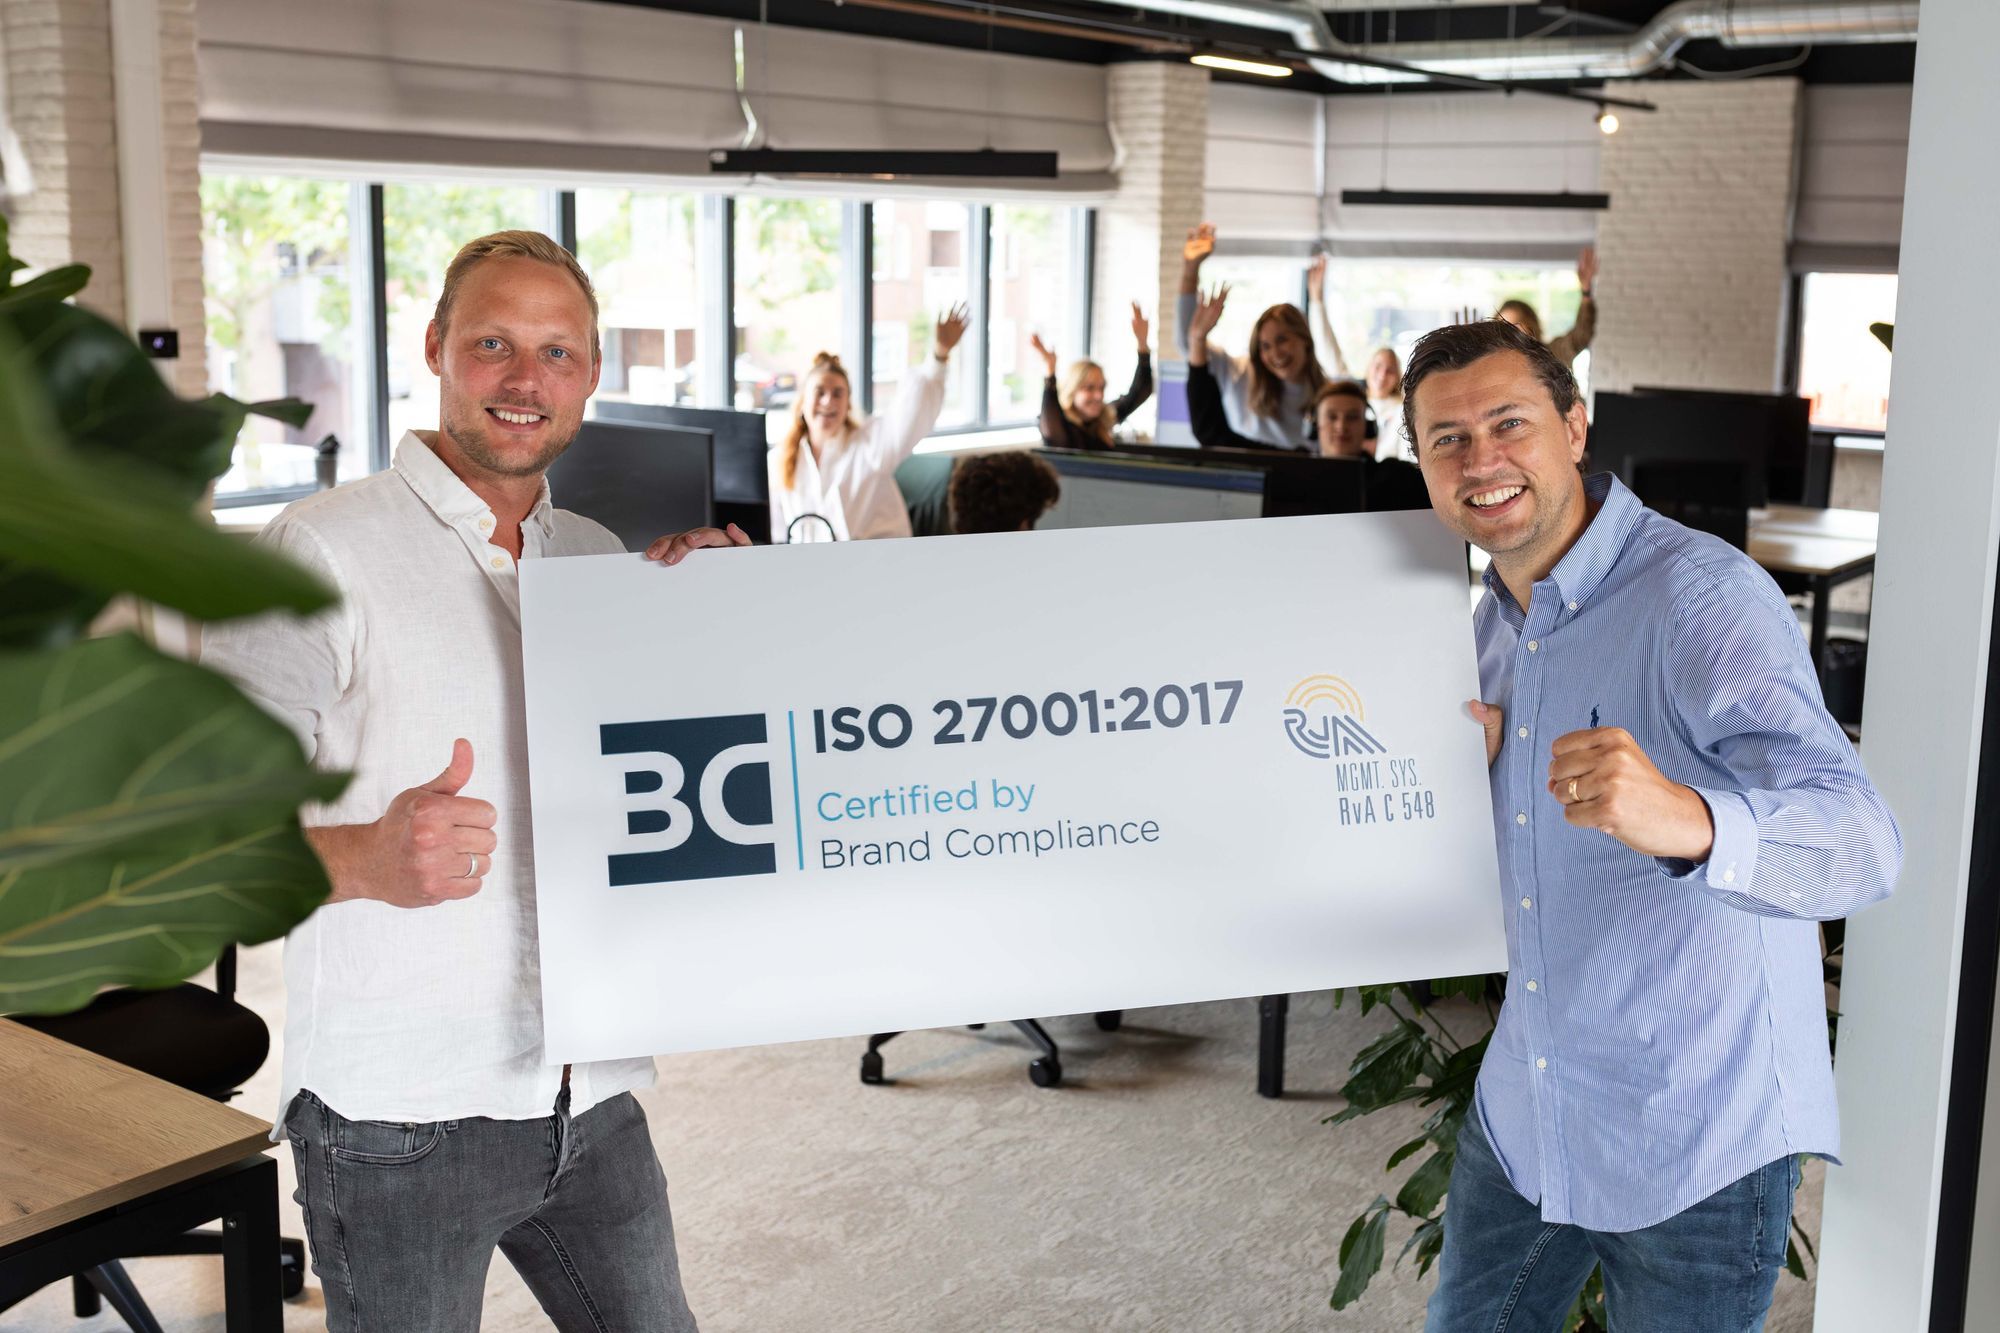 ISO 27001 certification achieved by vPlan!